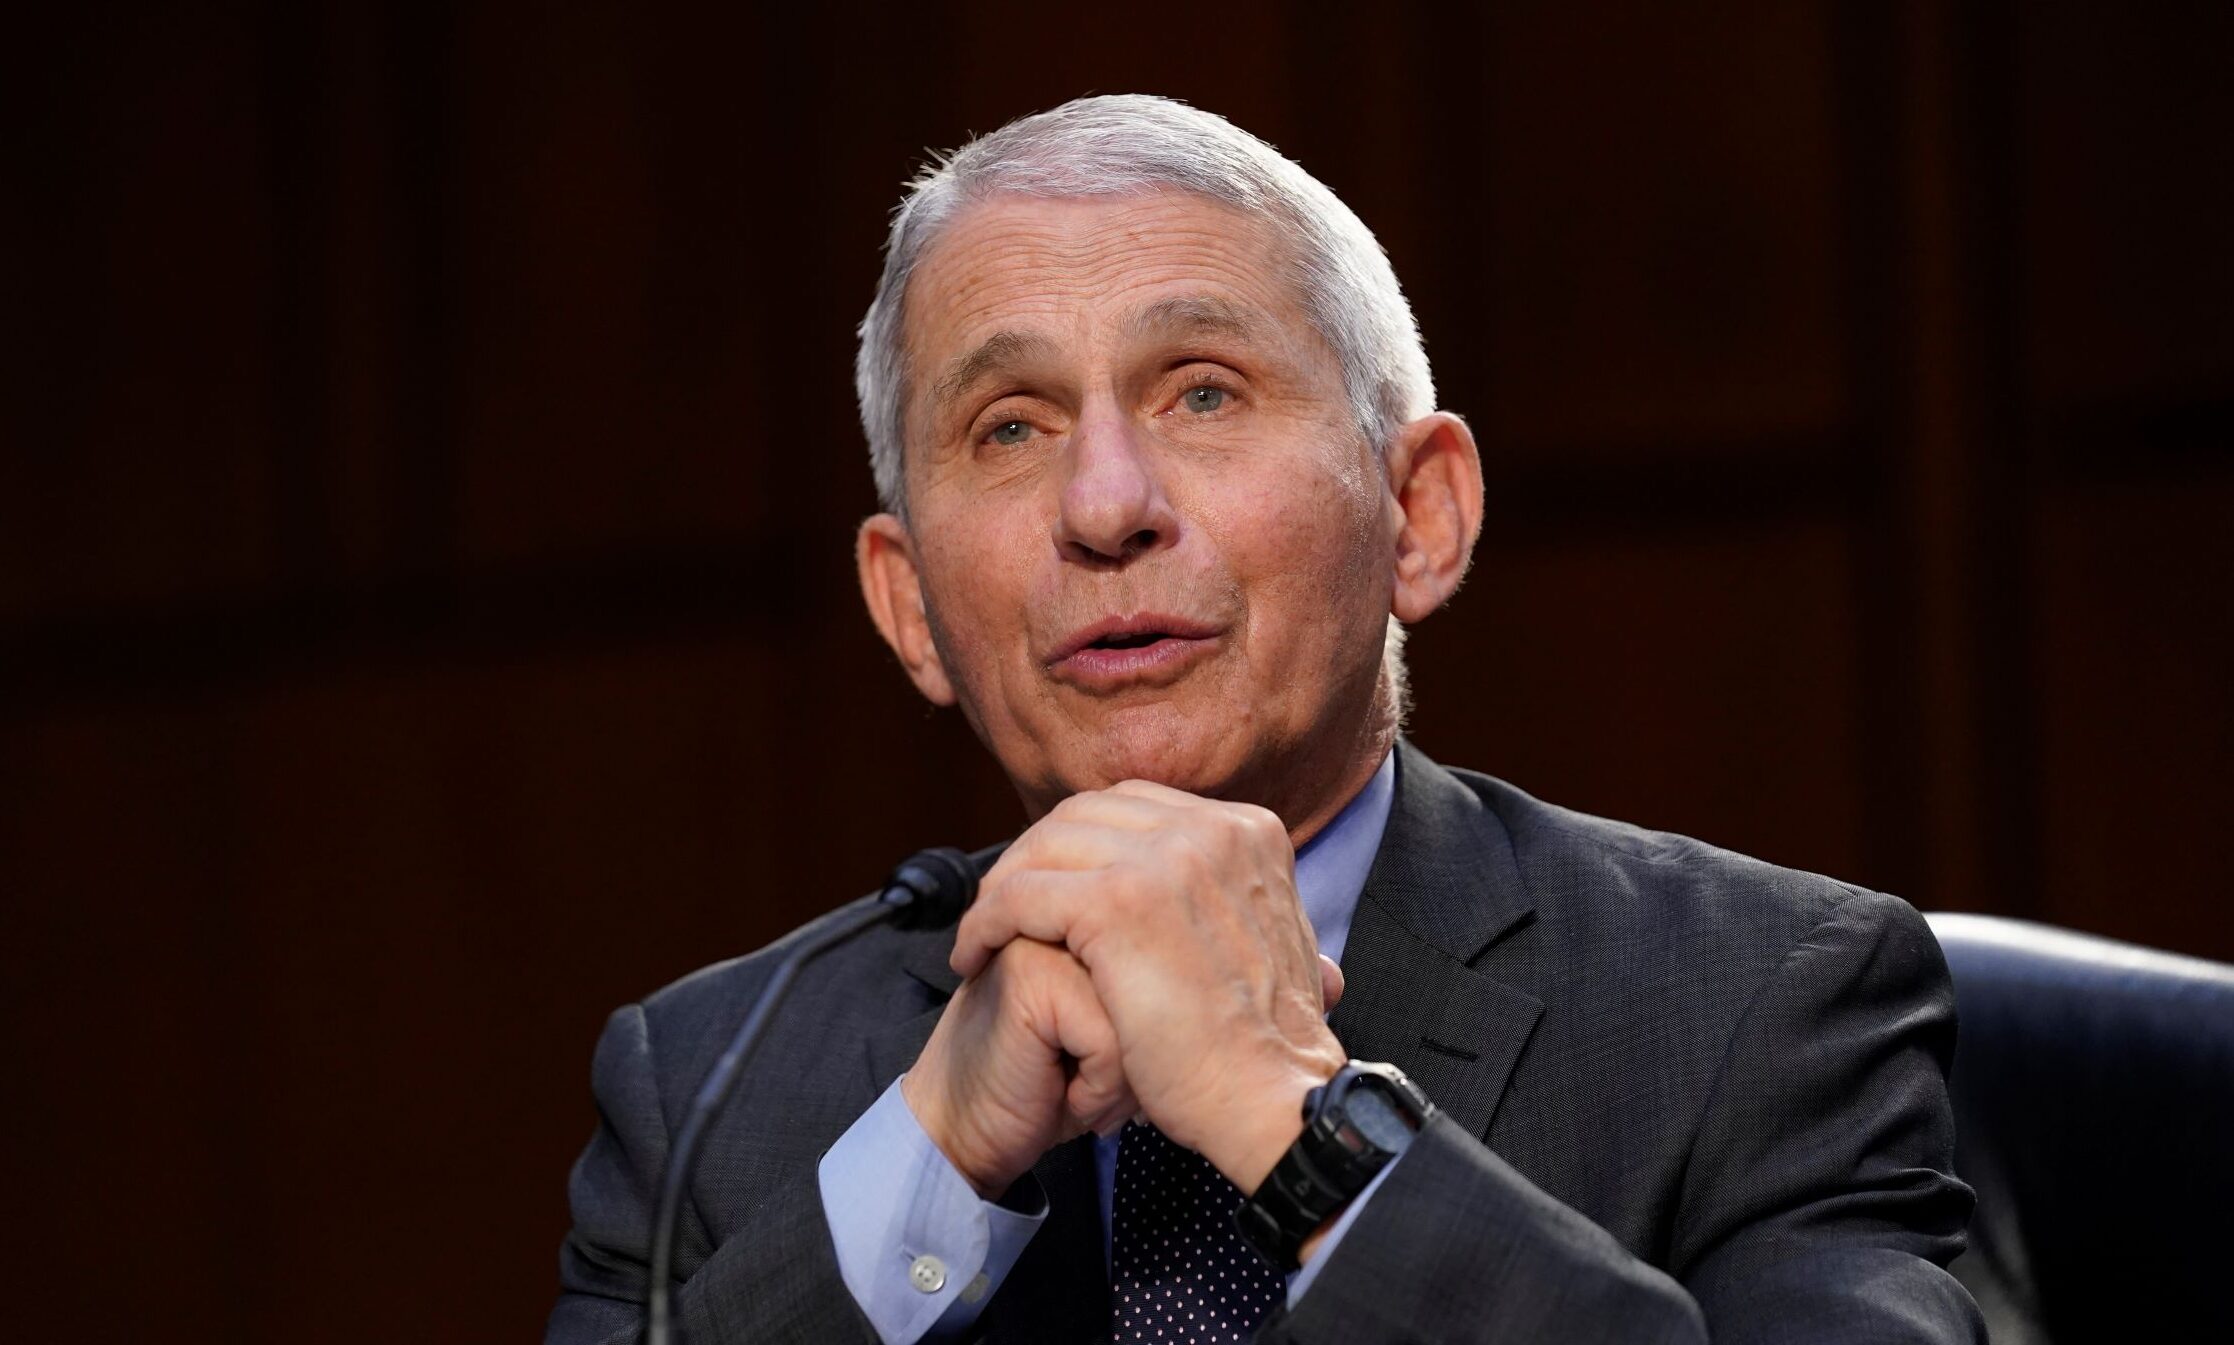 Fauci: Johnson & Johnson Vaccine Should Have Been 2 Doses